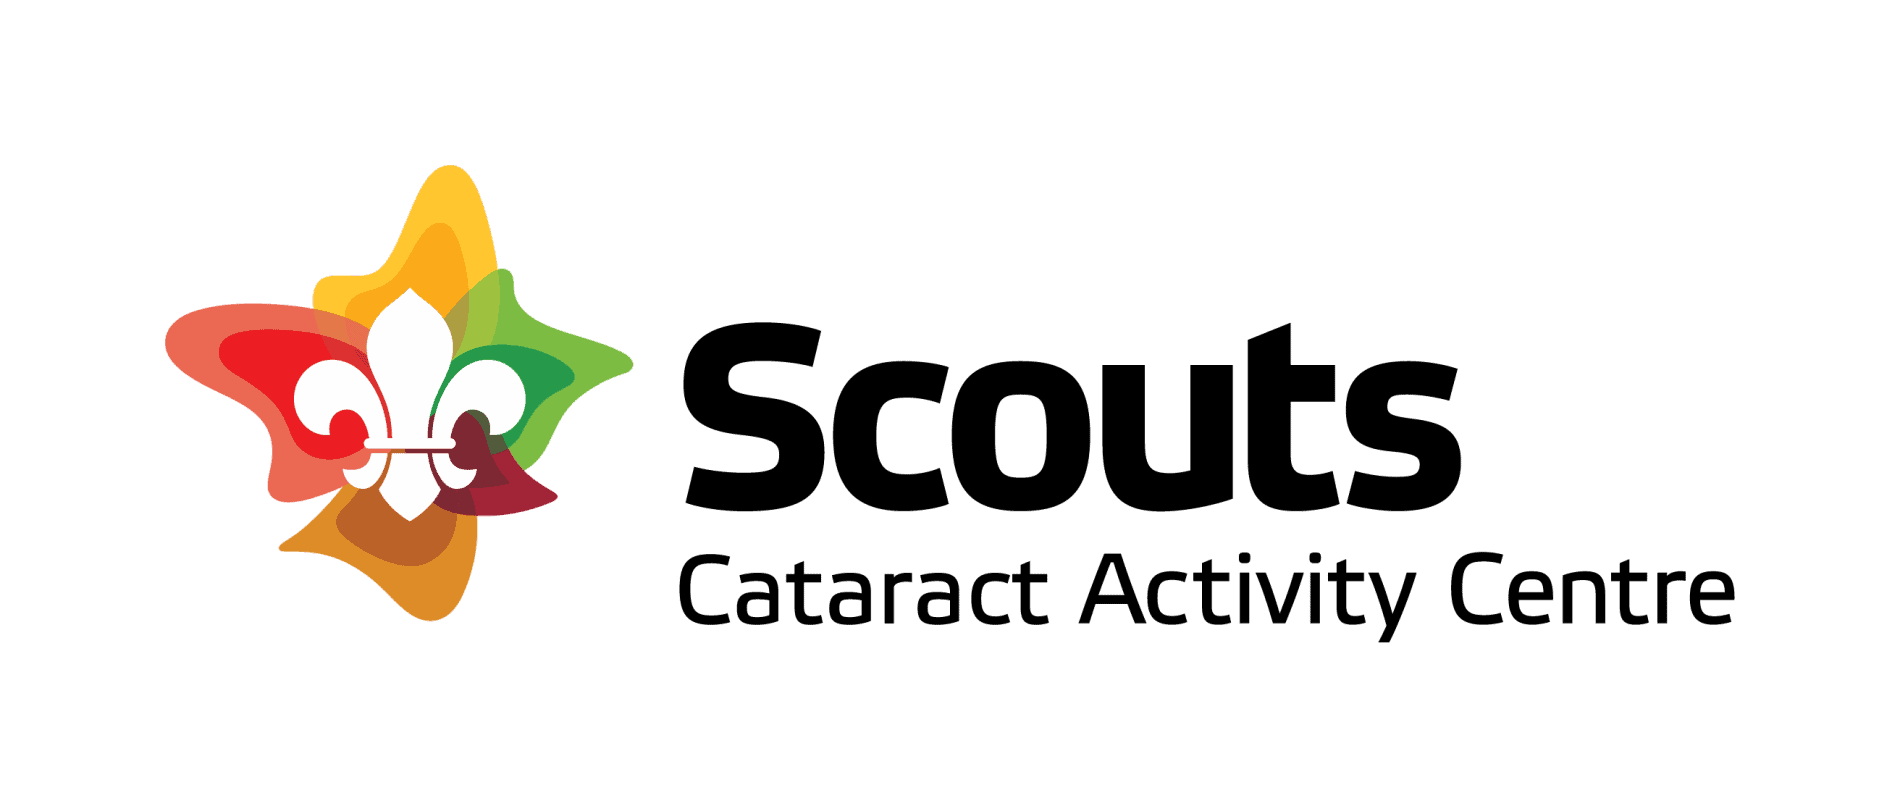 Cataract Activity Centre | NSW School Camp and Excursion Venue, Scout Camps, Corporate Retreats and Community Group Events